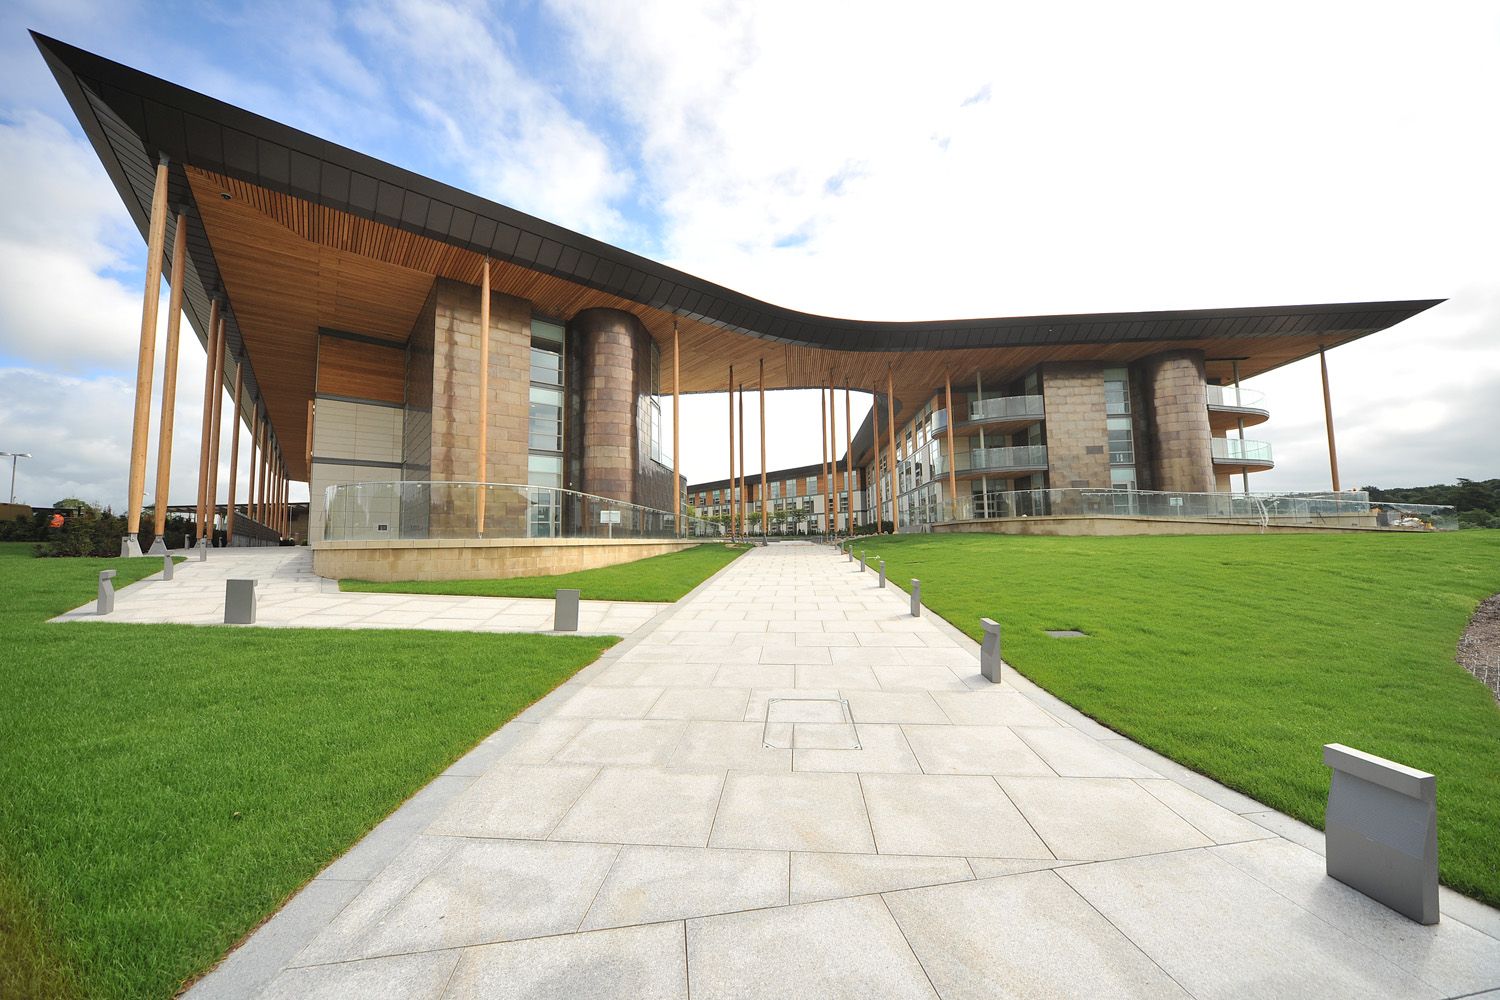 View of the Siberian Larch external timber cladded ceilings by BCL Timber, installed at St. George's Park National FA Centre in Burton-on-Trent 